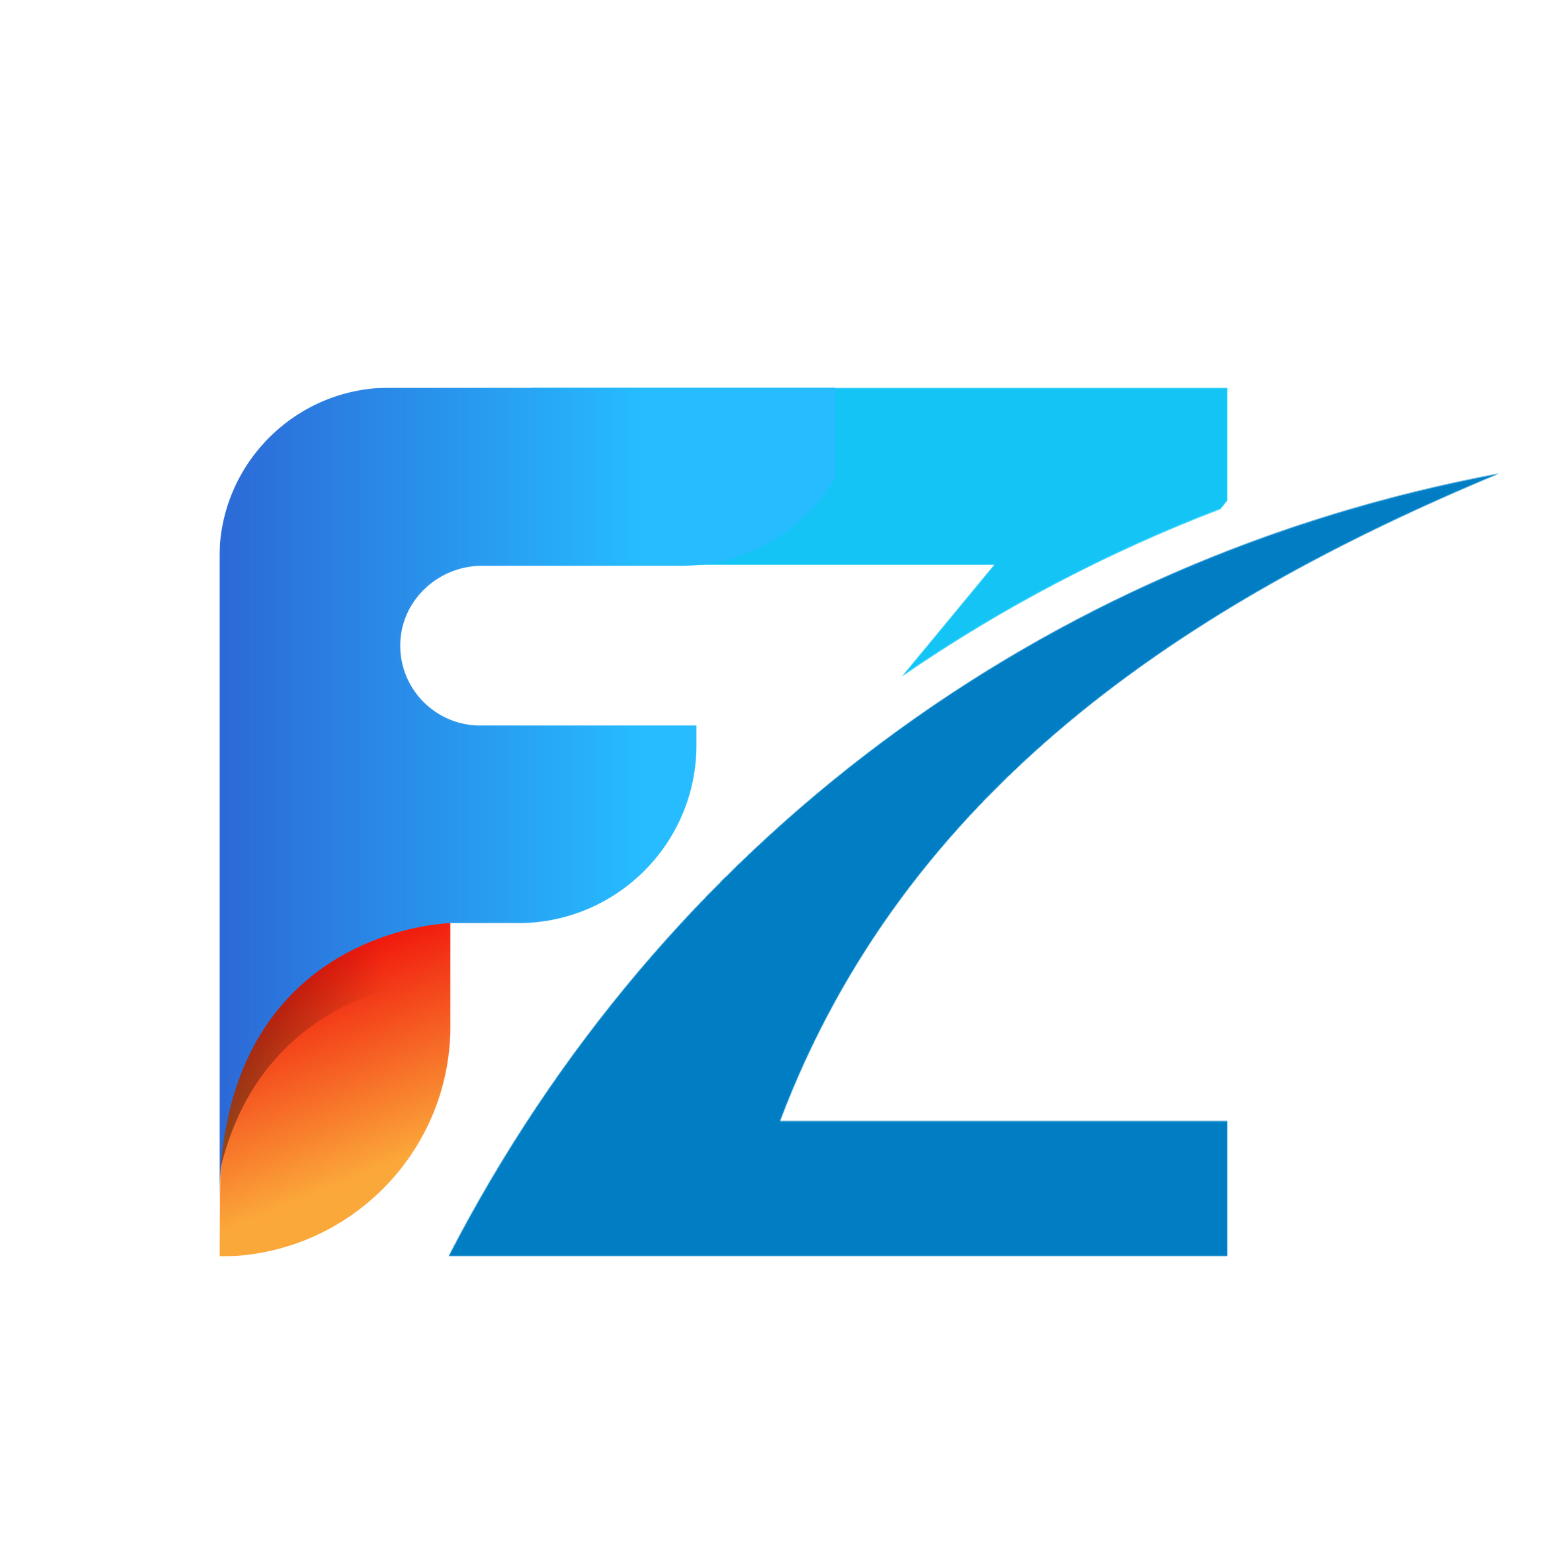 FlyZenix | FlyZenix is a leading IT company that provides a wide range of services to businesses of all sizes. We specialize in helping our clients to improve their IT infrastructure, security, and performance. We offer a comprehensive suite of services.